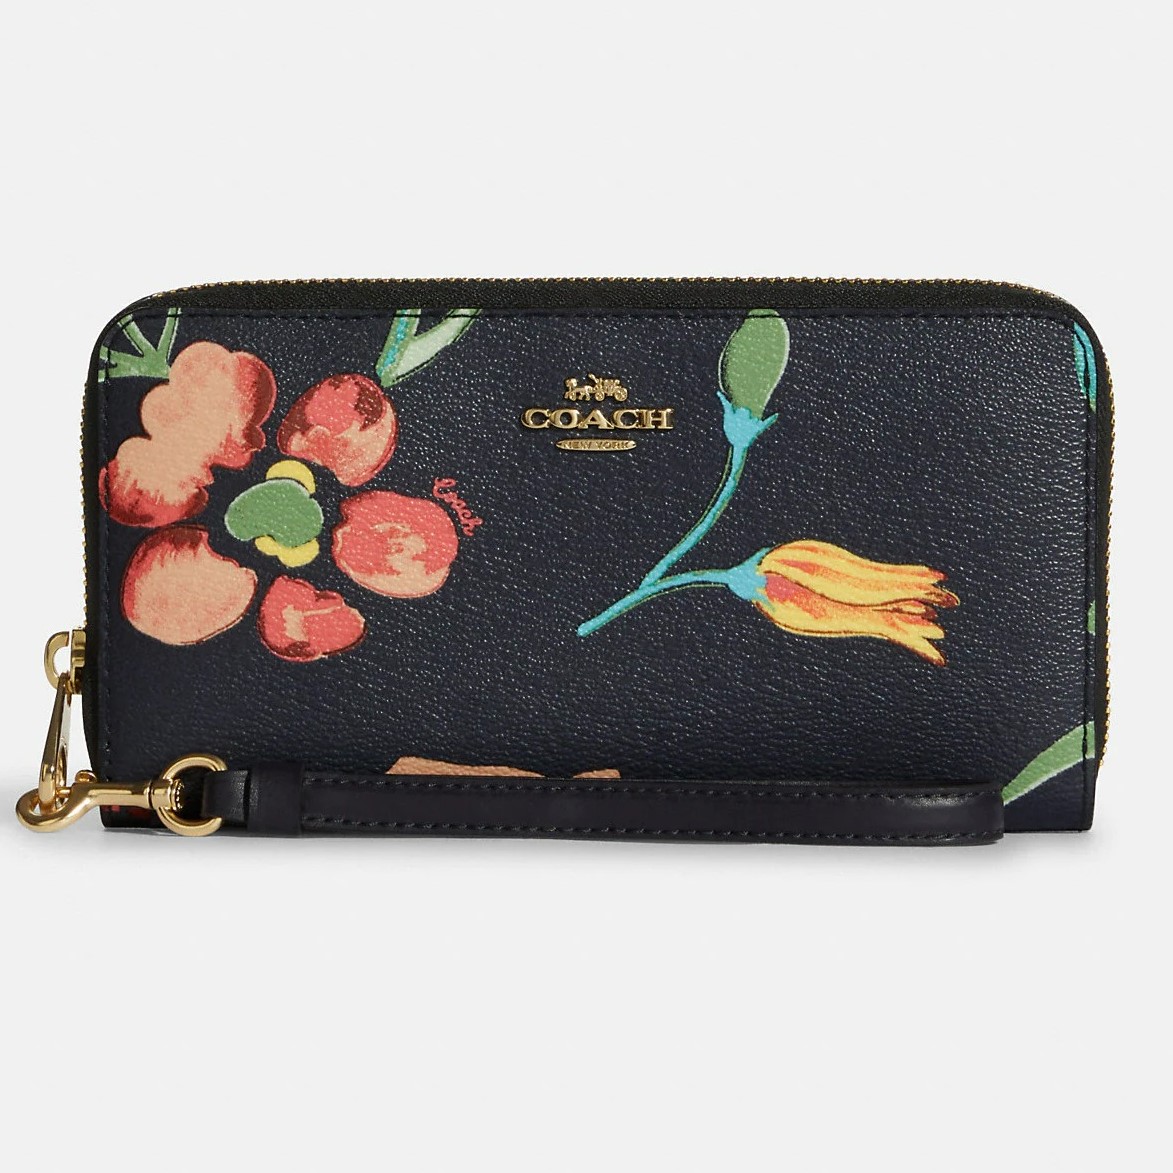 VÍ COACH DÀI NỮ LONG ZIP AROUND WALLET WITH DREAMY LAND FLORAL PRINT 2